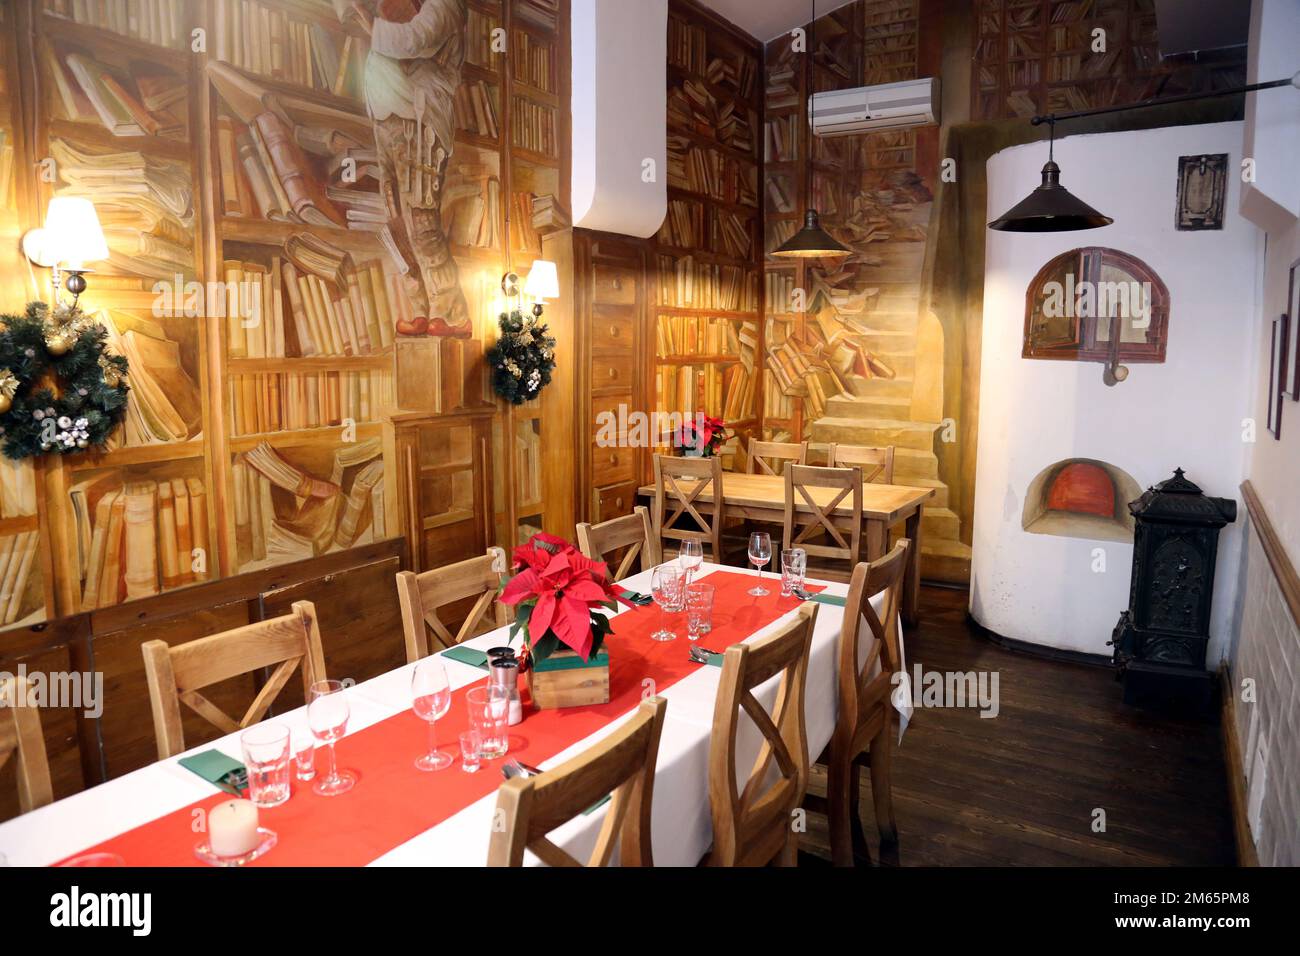 Cracow. Krakow. Poland. Setup and decoration of the traditional style restaurant interior. Stock Photo